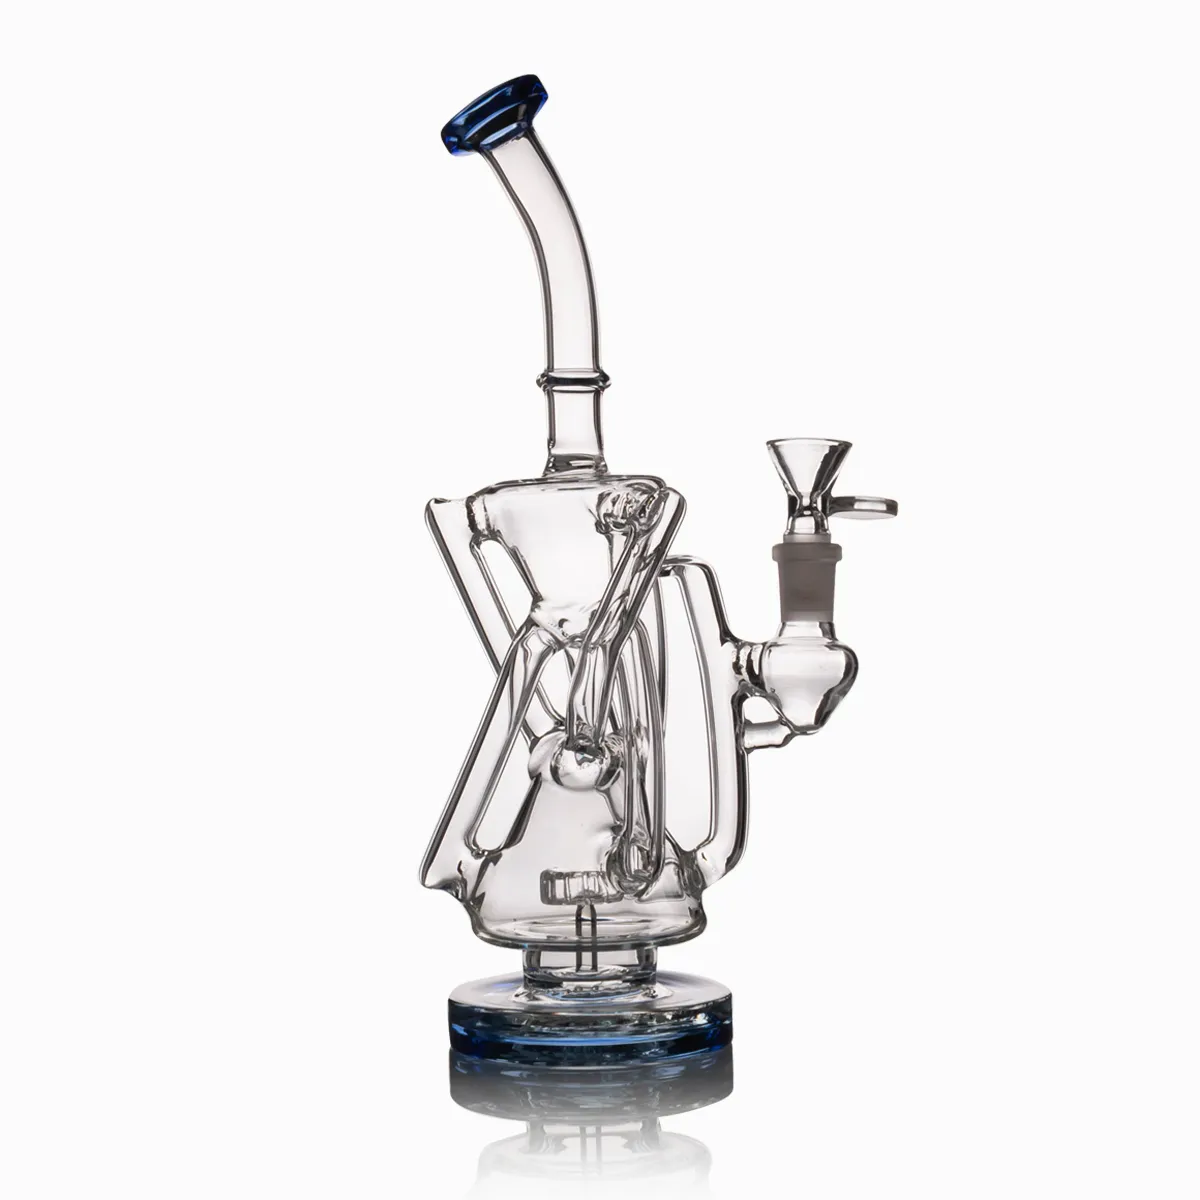 Glass Bong Recycler Oil Rig Wax Water Pipe Heady Klein Bongs Hookahs Dab rigs pipes with 14mm bowl perc bubbler cyclone beaker